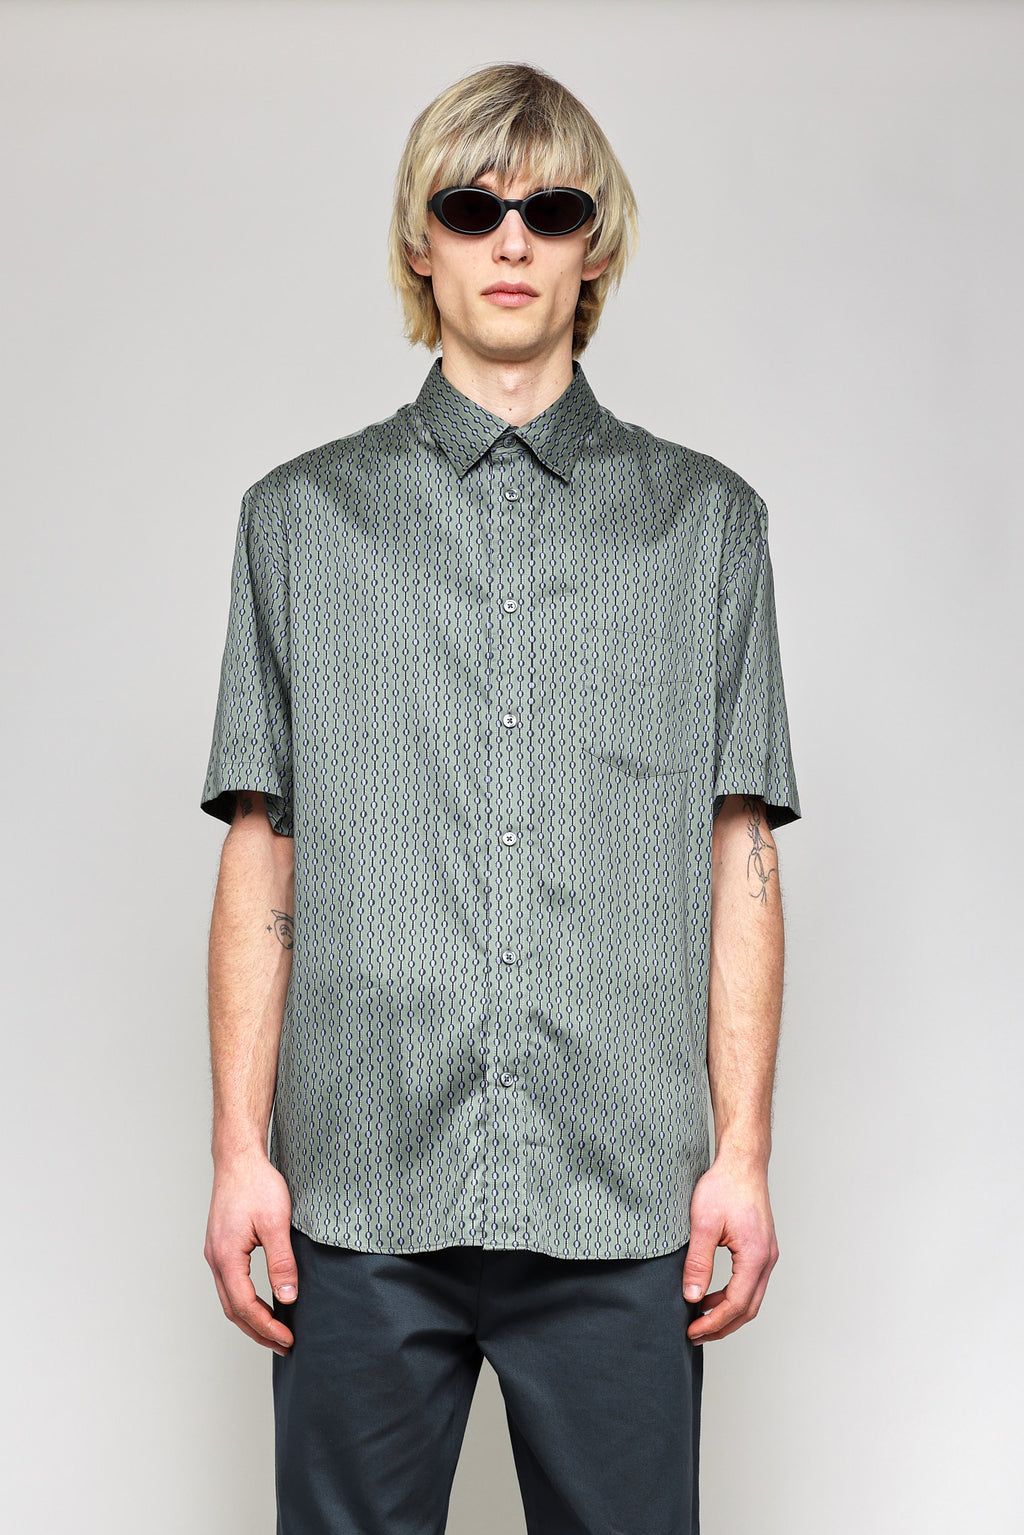 Japanese Dotted Stripe Print in Green 02